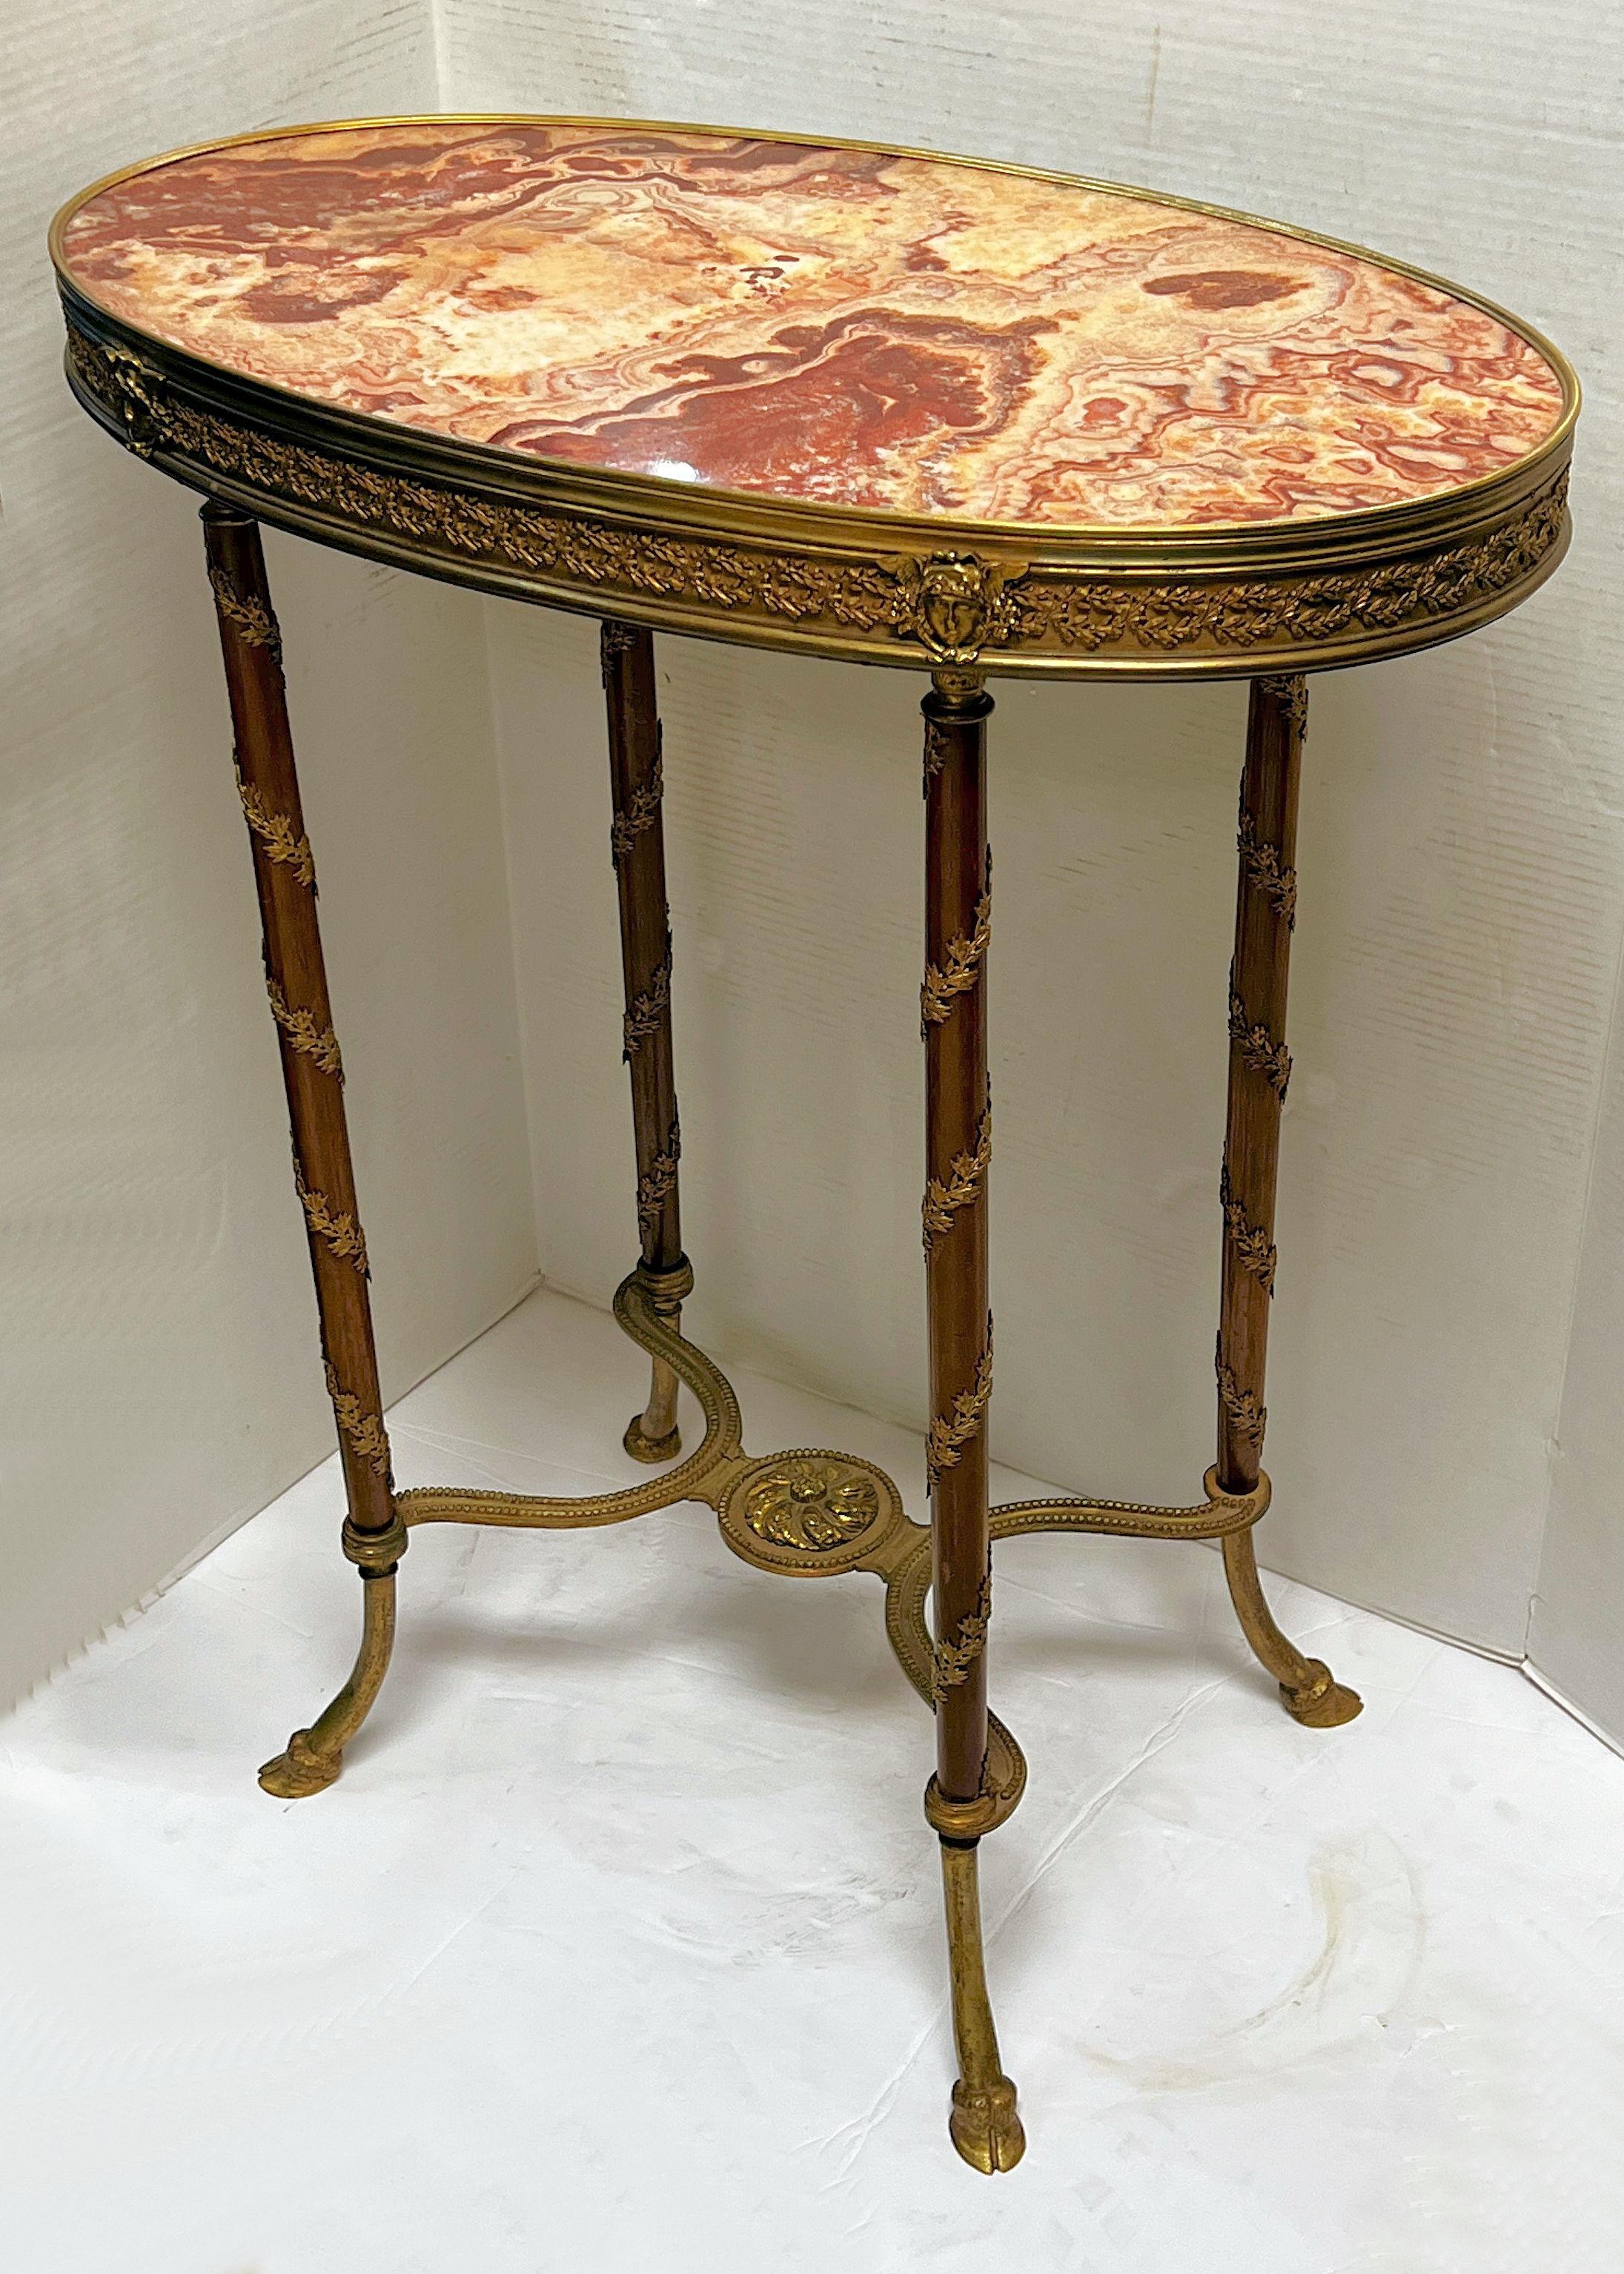 Exquisite French 19 century side table in the Louis XVI style with oval shaped variegated red marble top and frieze, decorated with neoclassical masks and laurel wreath motifs wrapping the legs terminating in hoof style feet.